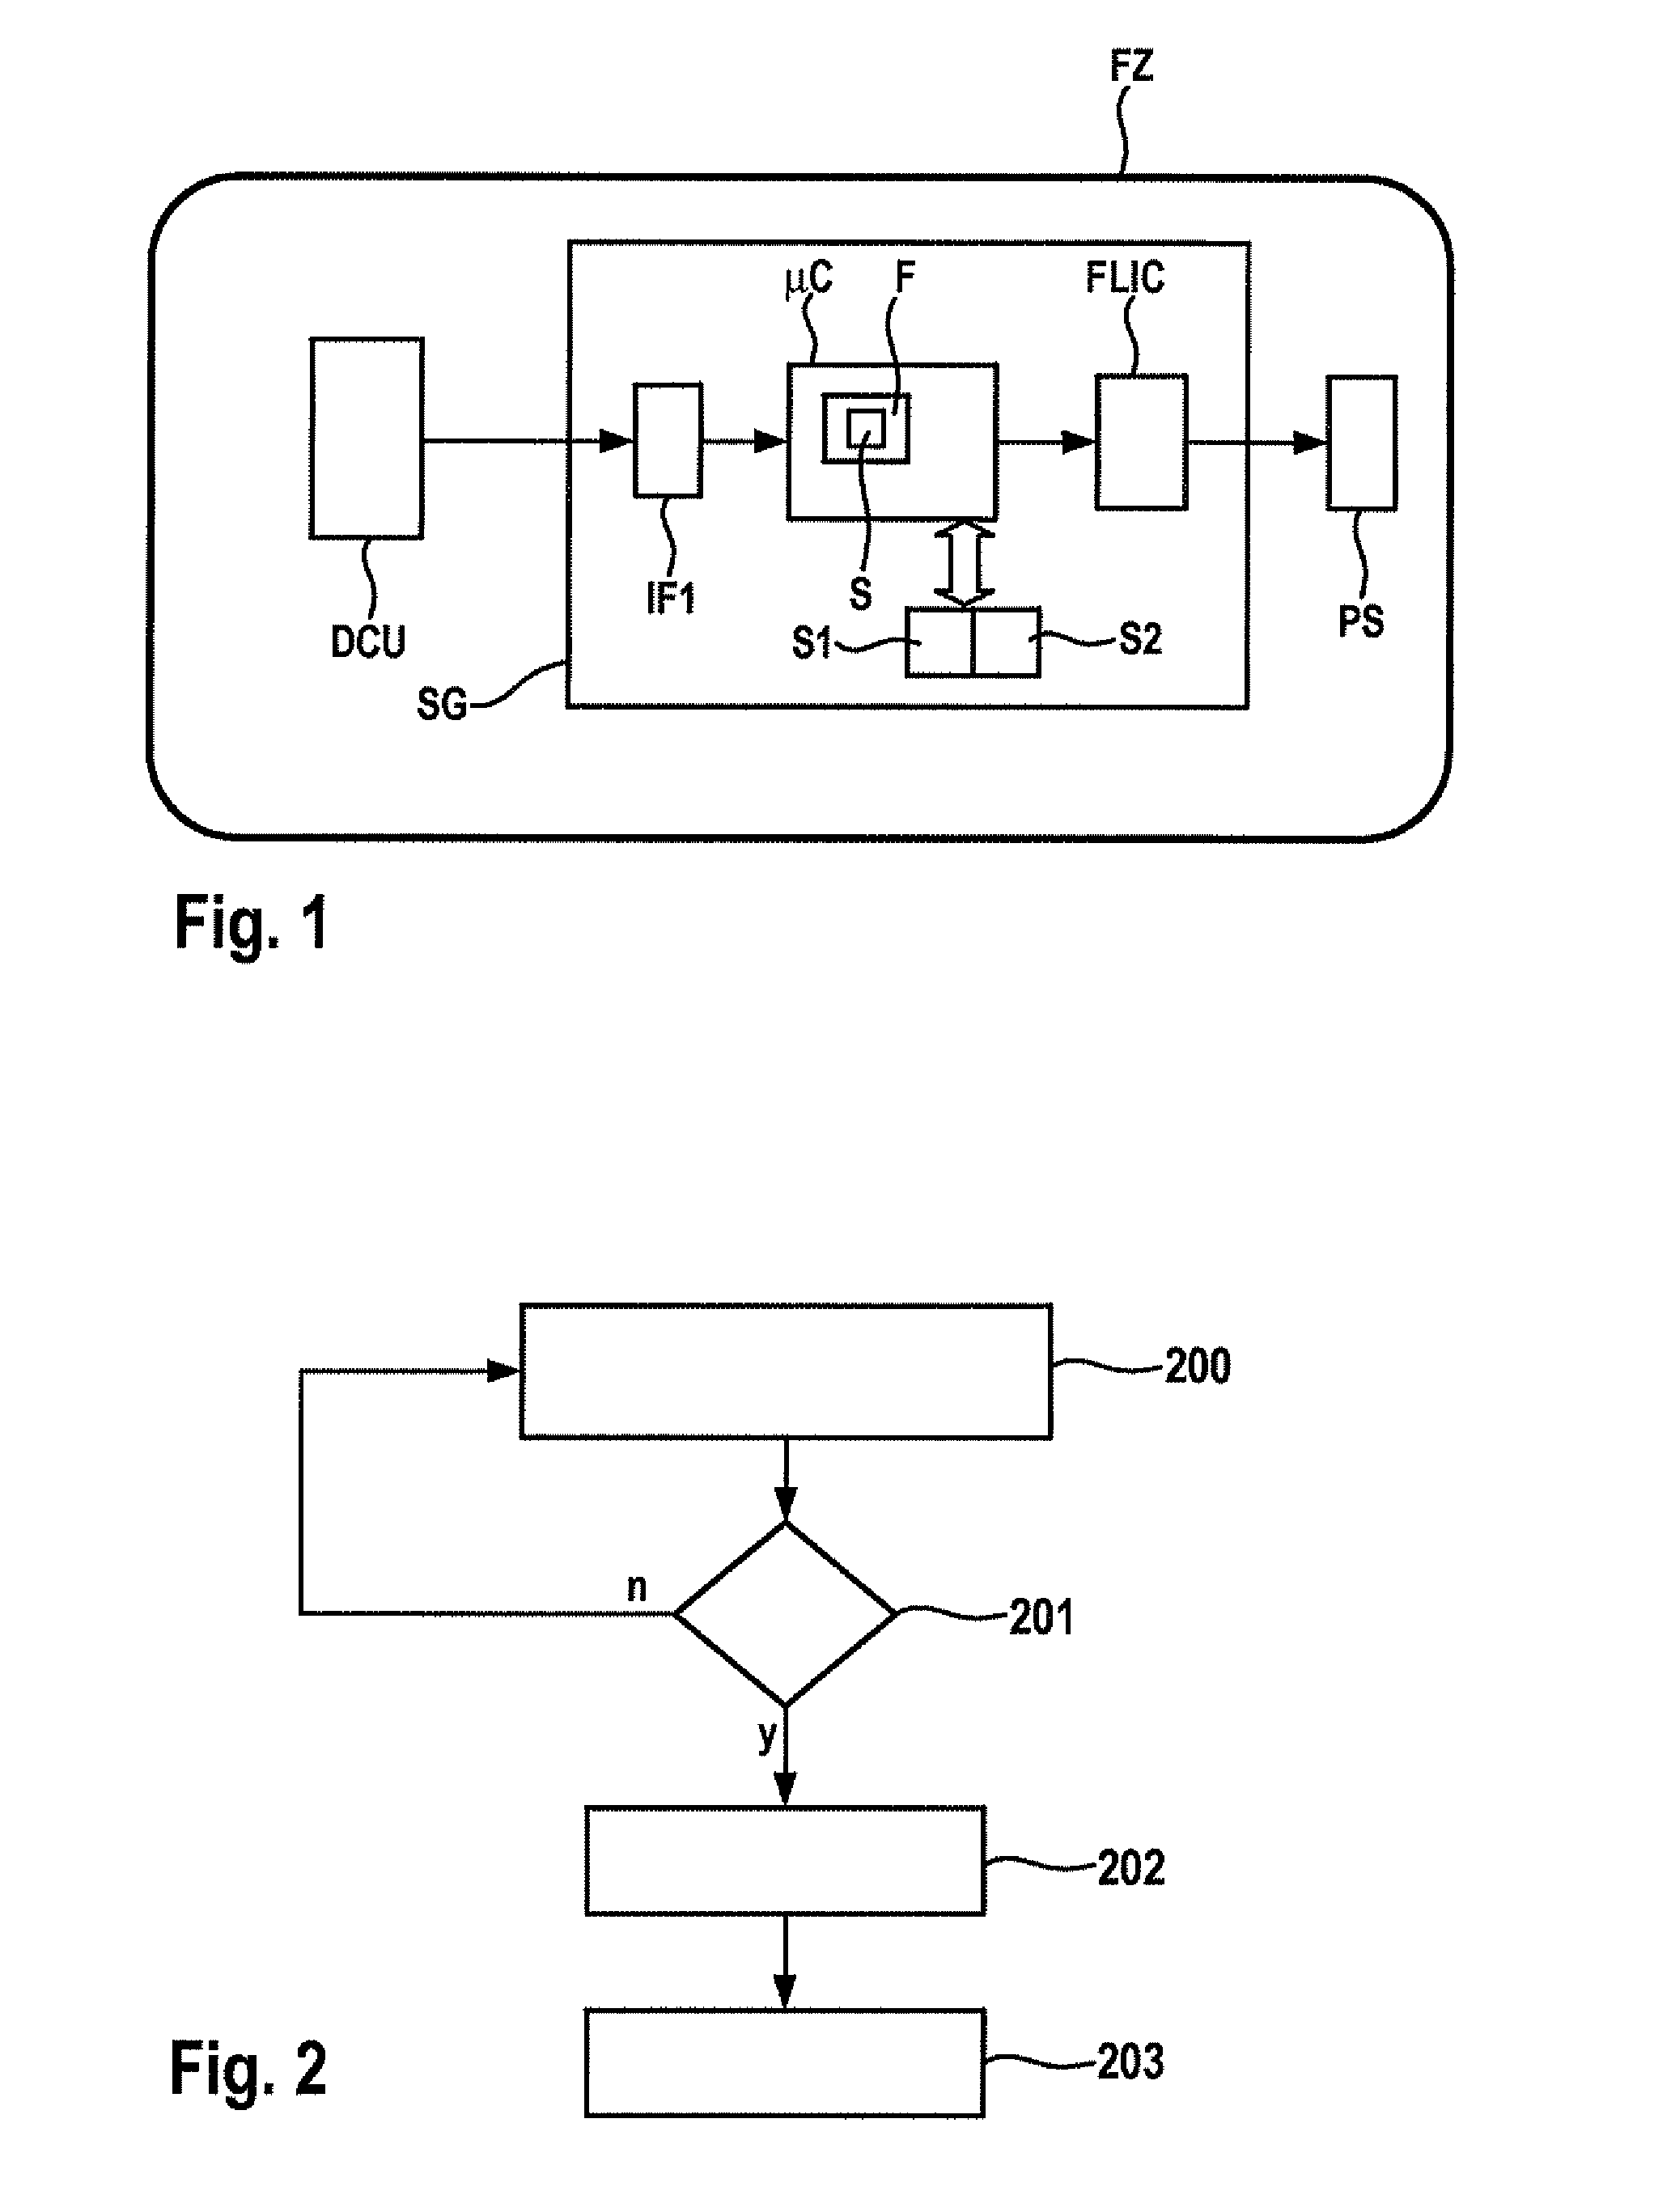 Method for error handling for a control device for a passenger protection system and a control device for a passenger protection system